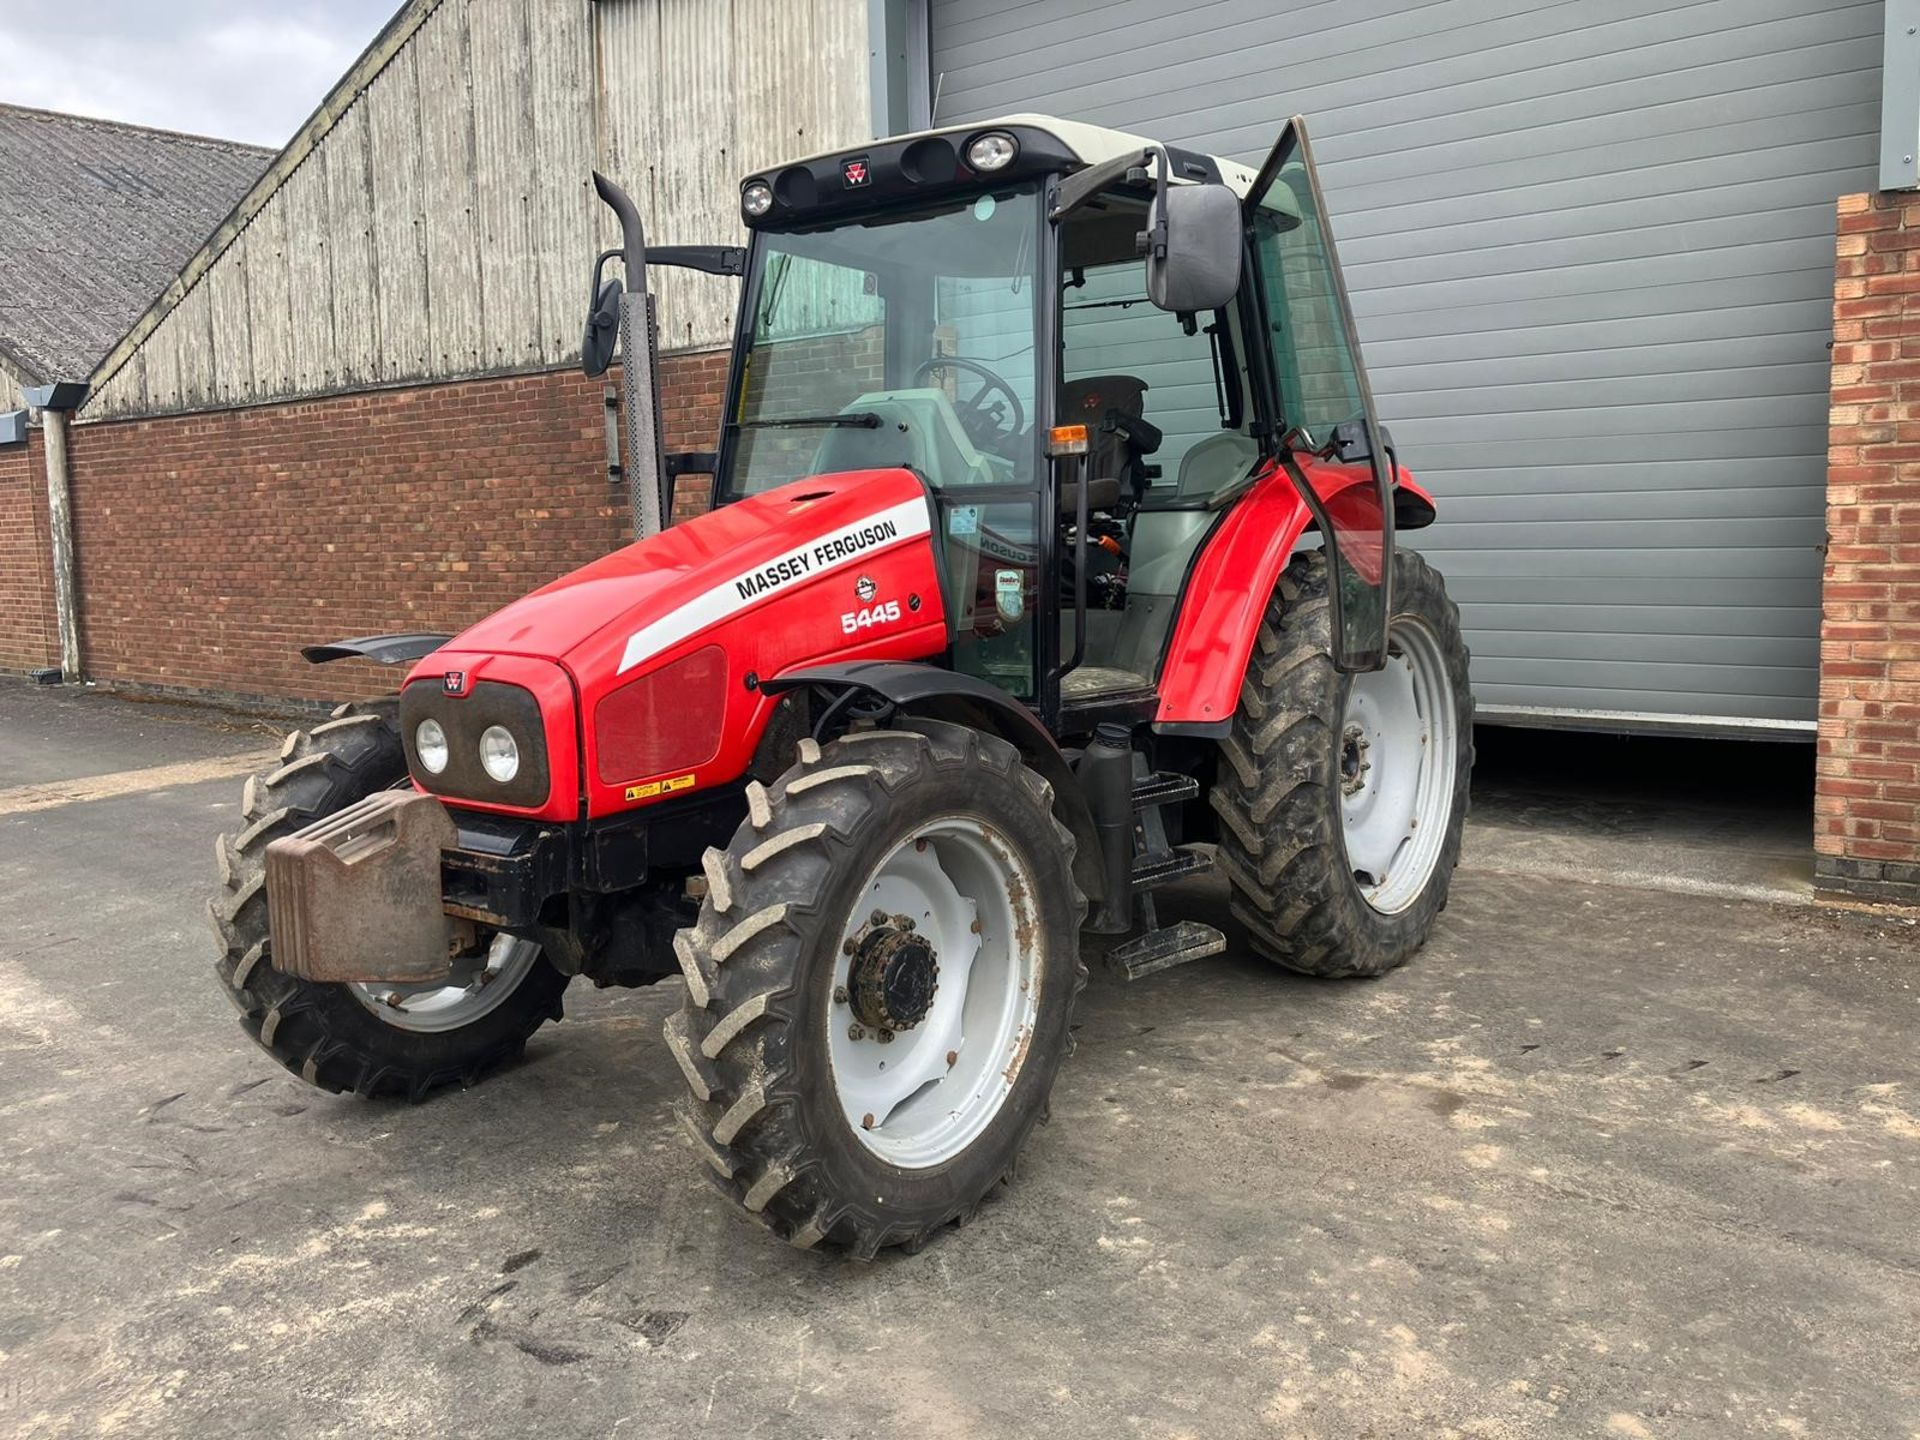 (06) Massey Ferguson 5445 4WD Drop nose tractor, left hand side forward and reverse, Front: 11.